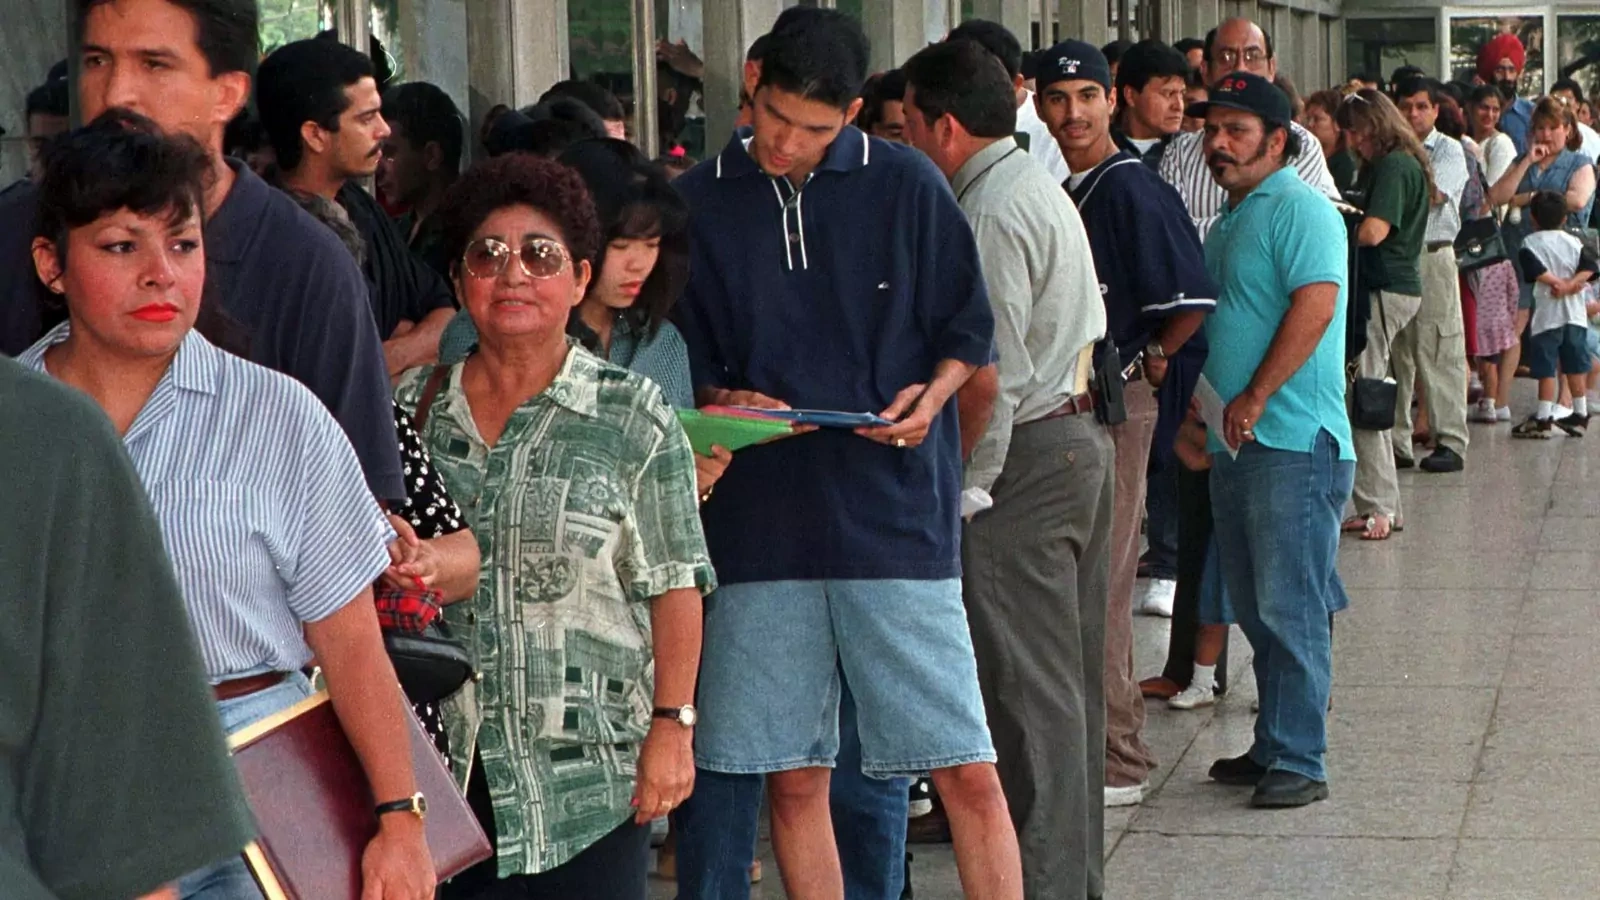 A group of immigrants, who qualify for residency in the United States but do not yet have their legal papers, stand in line at the Immigration and Naturalization Service offices in Los Angeles. 